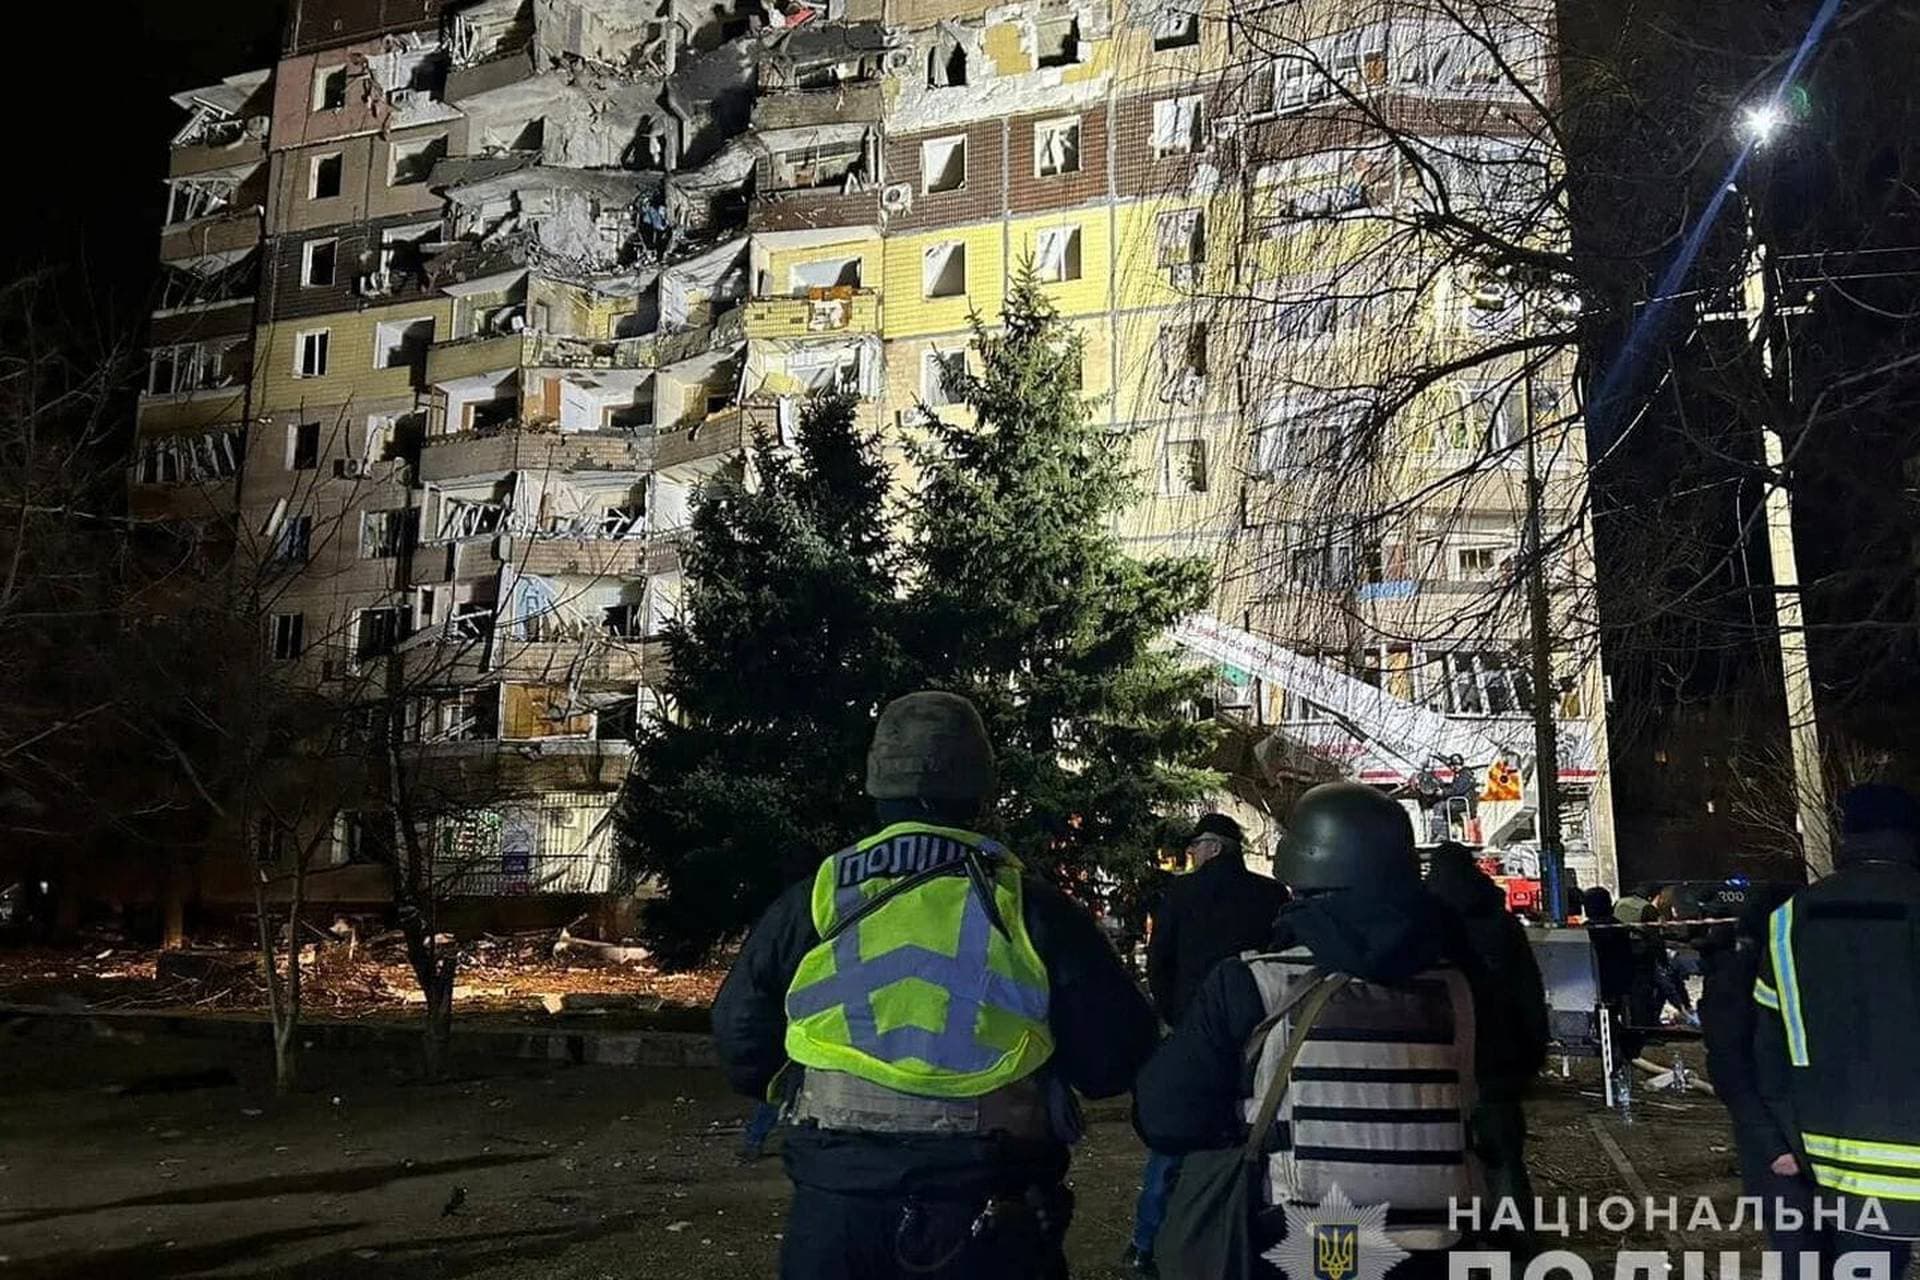 Police officers stand in front of an apartment building damaged by a Russian missile strike in Kryvyi Rih